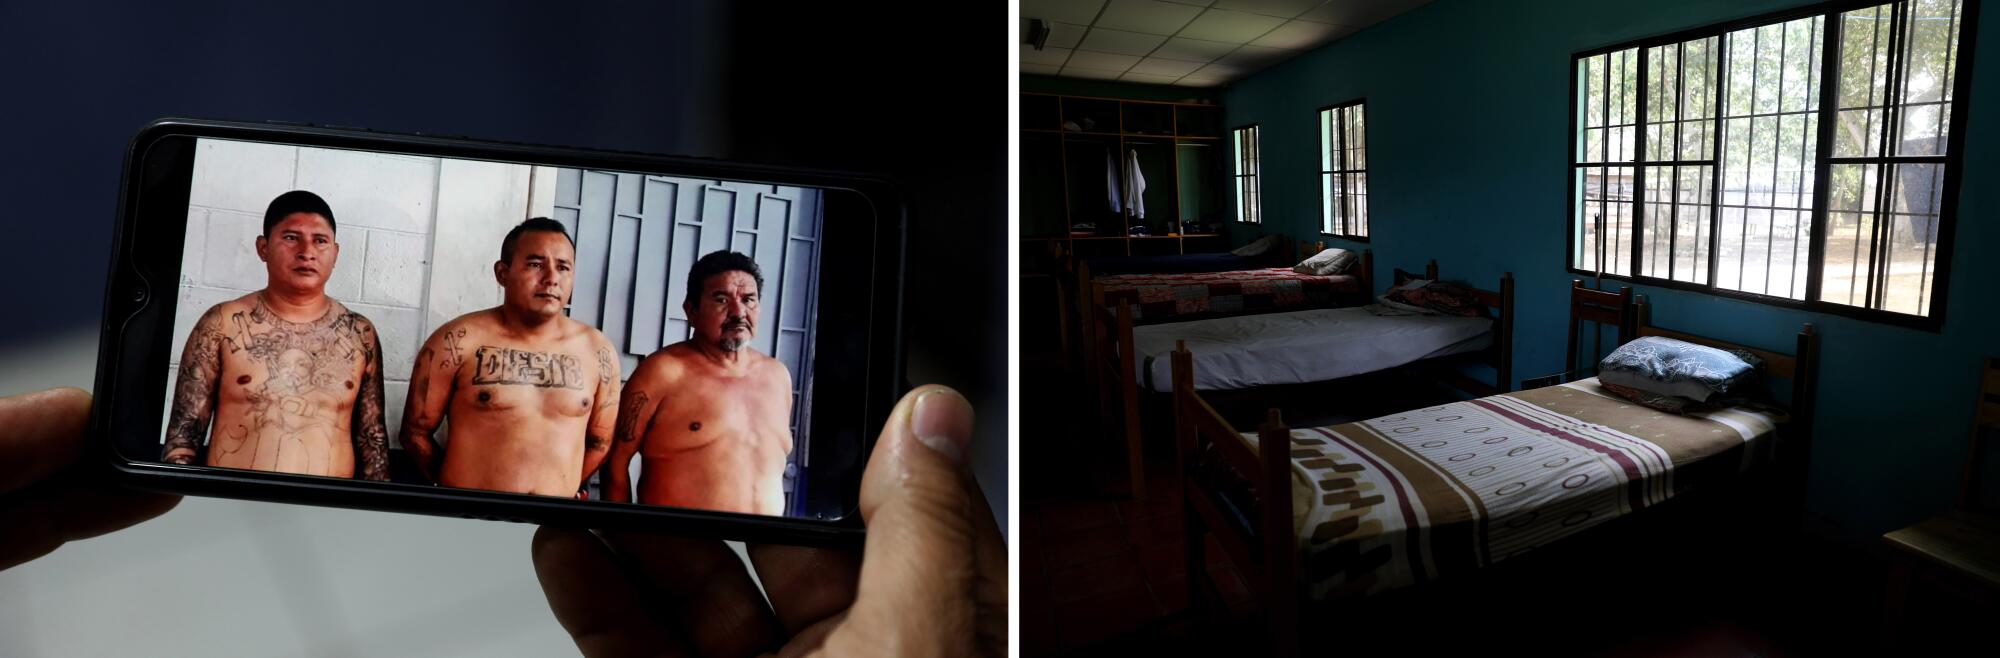 At left, a cellphone image of three tattooed men; on the right, neatly made twin beds in a room with windows
